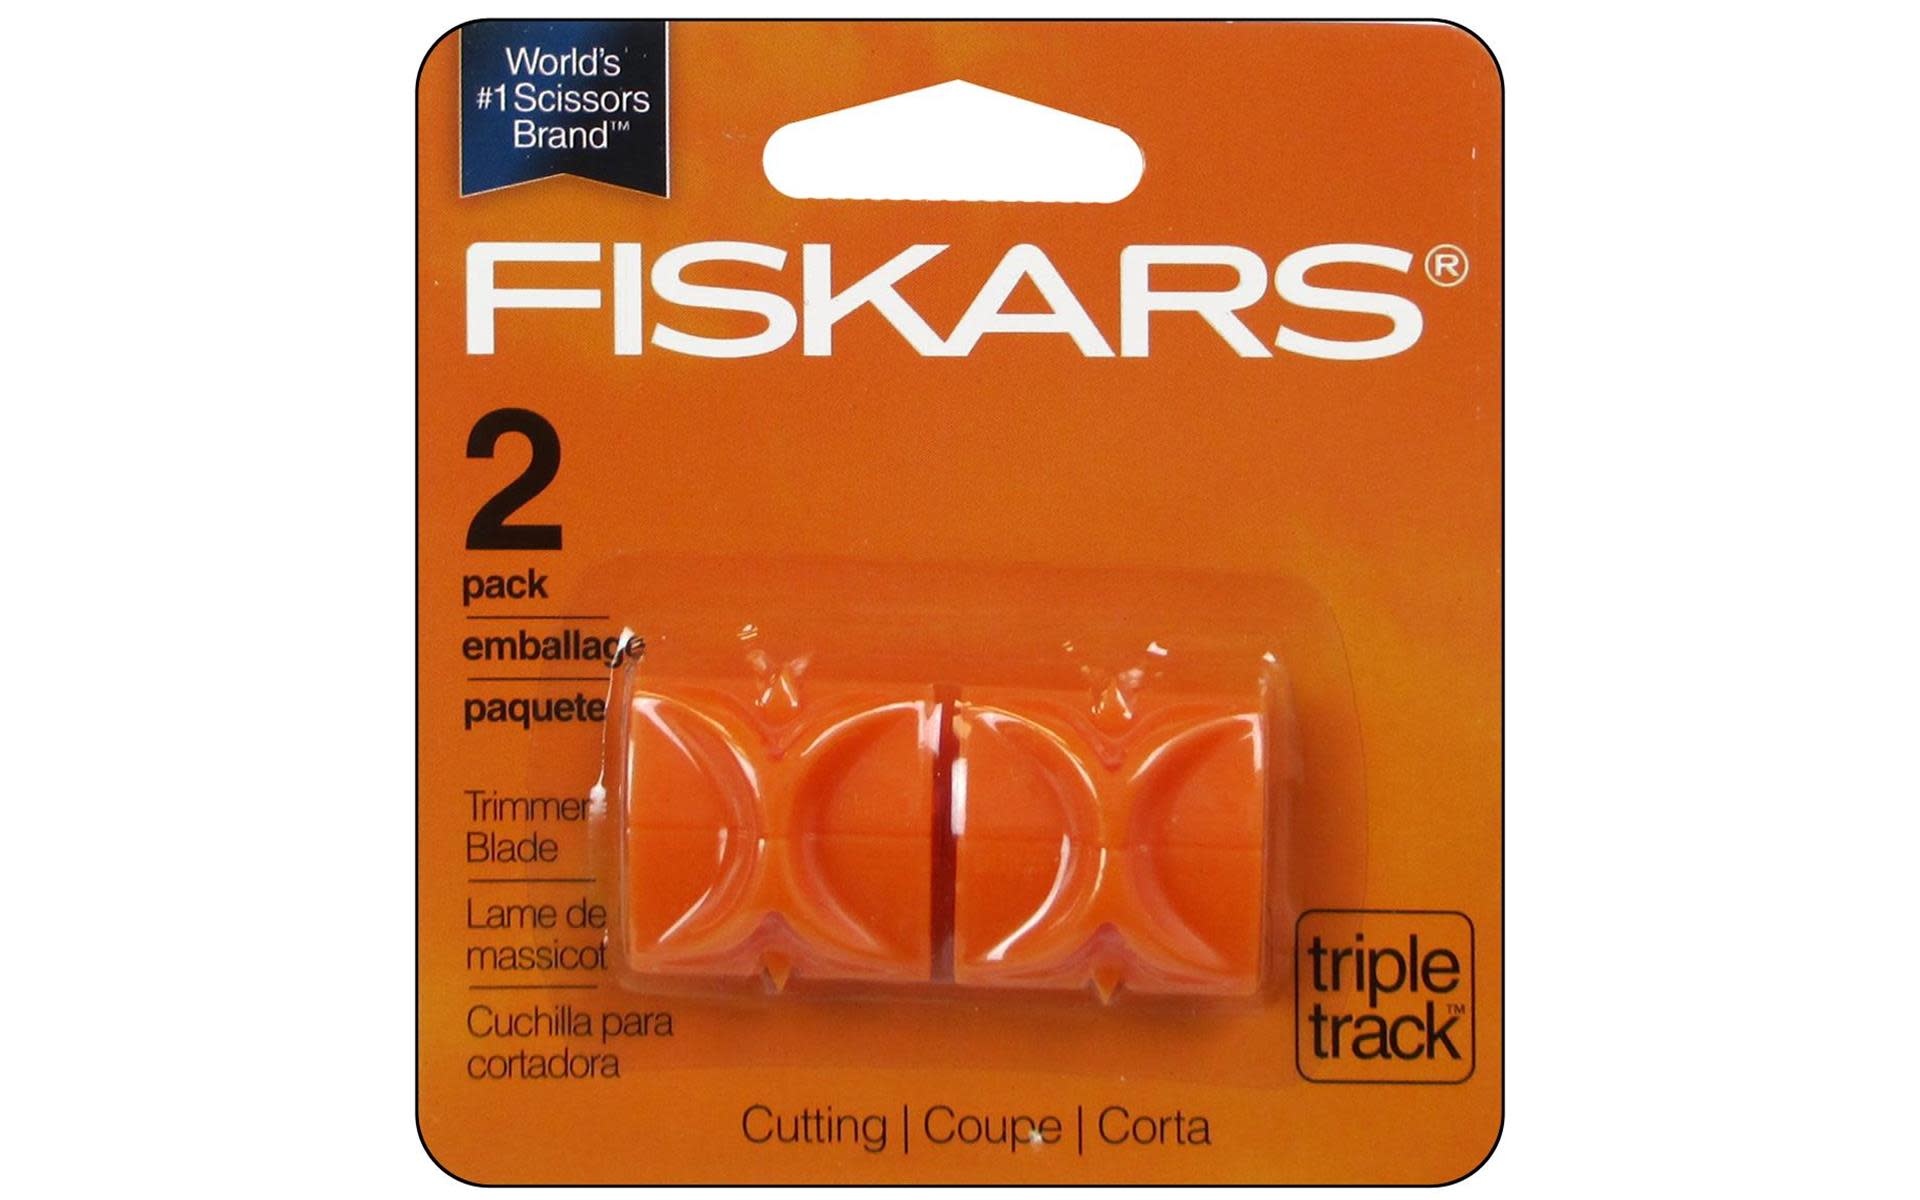 Fiskars Replacement Parts: Blades, Cutters, Trimmers and More